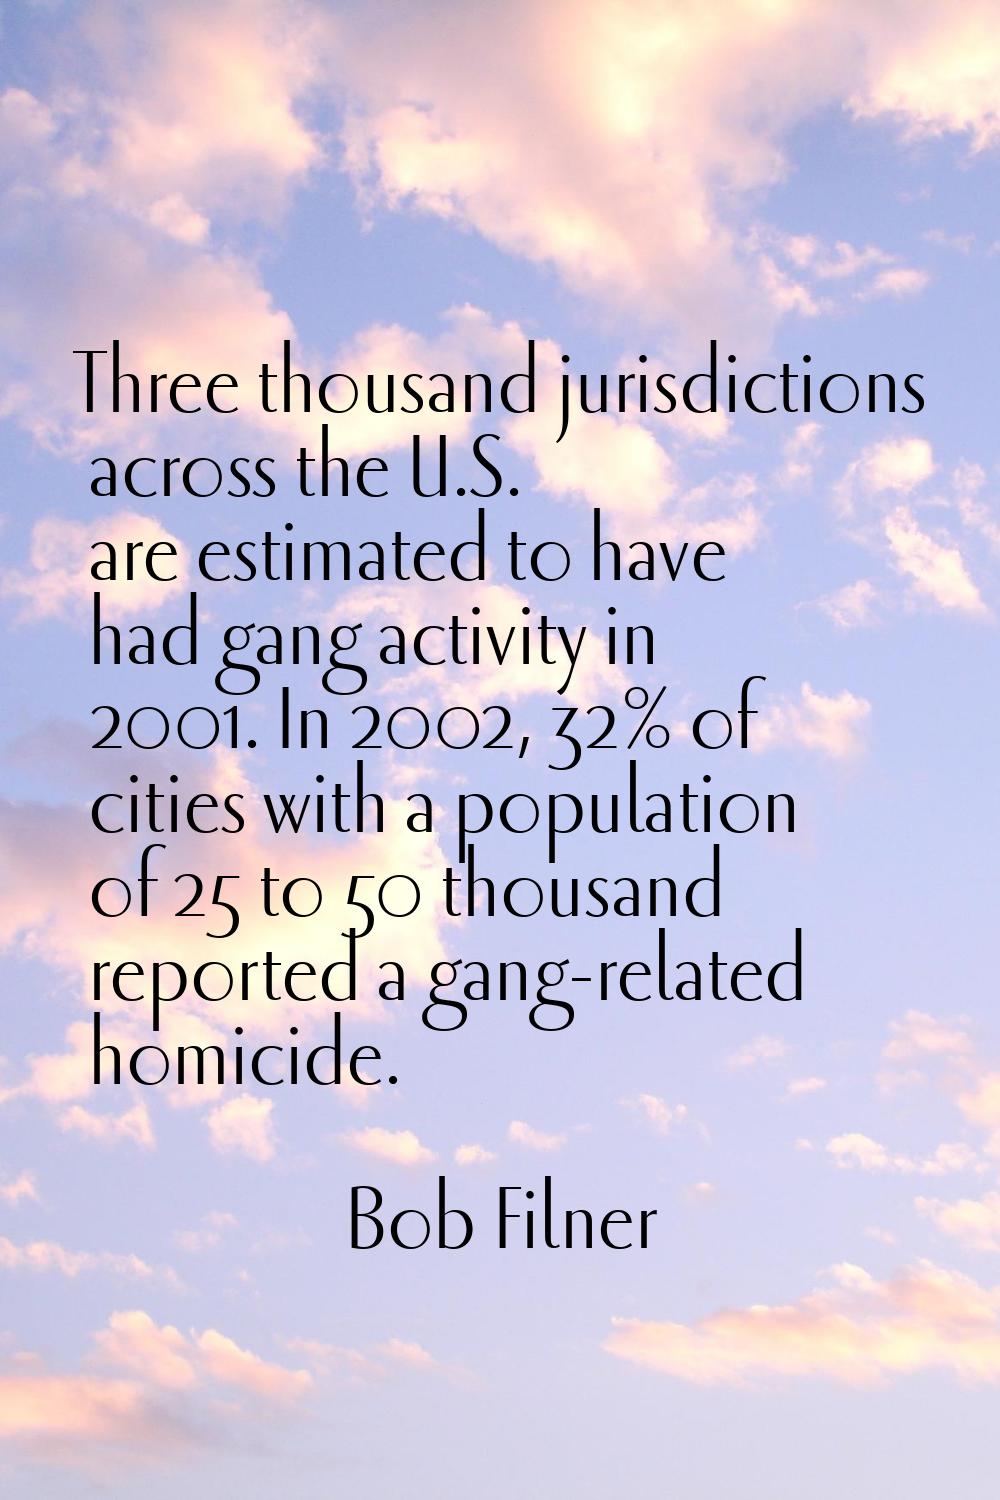 Three thousand jurisdictions across the U.S. are estimated to have had gang activity in 2001. In 20